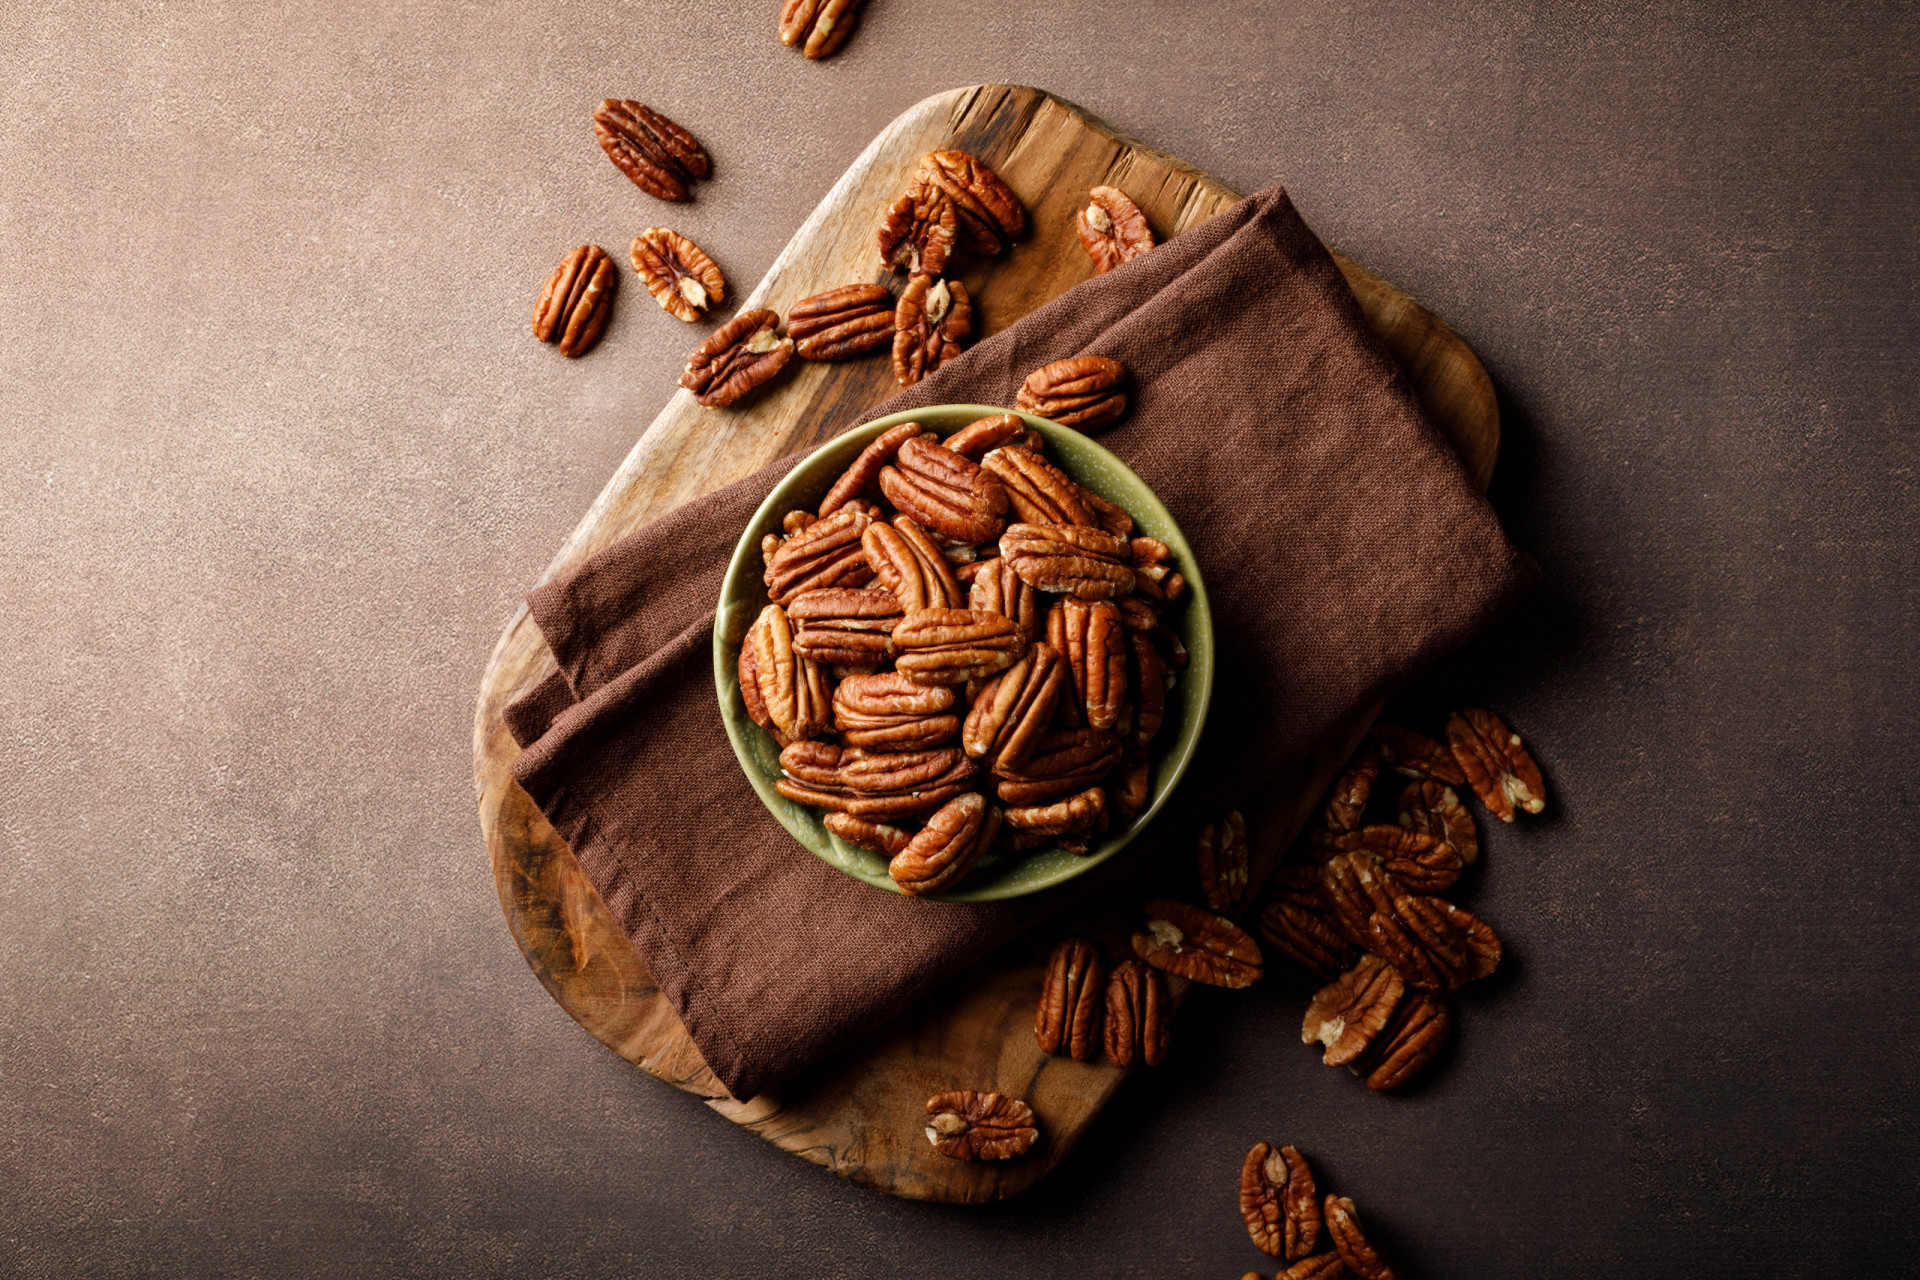 Go nuts for pecans! Health benefits and everyday uses